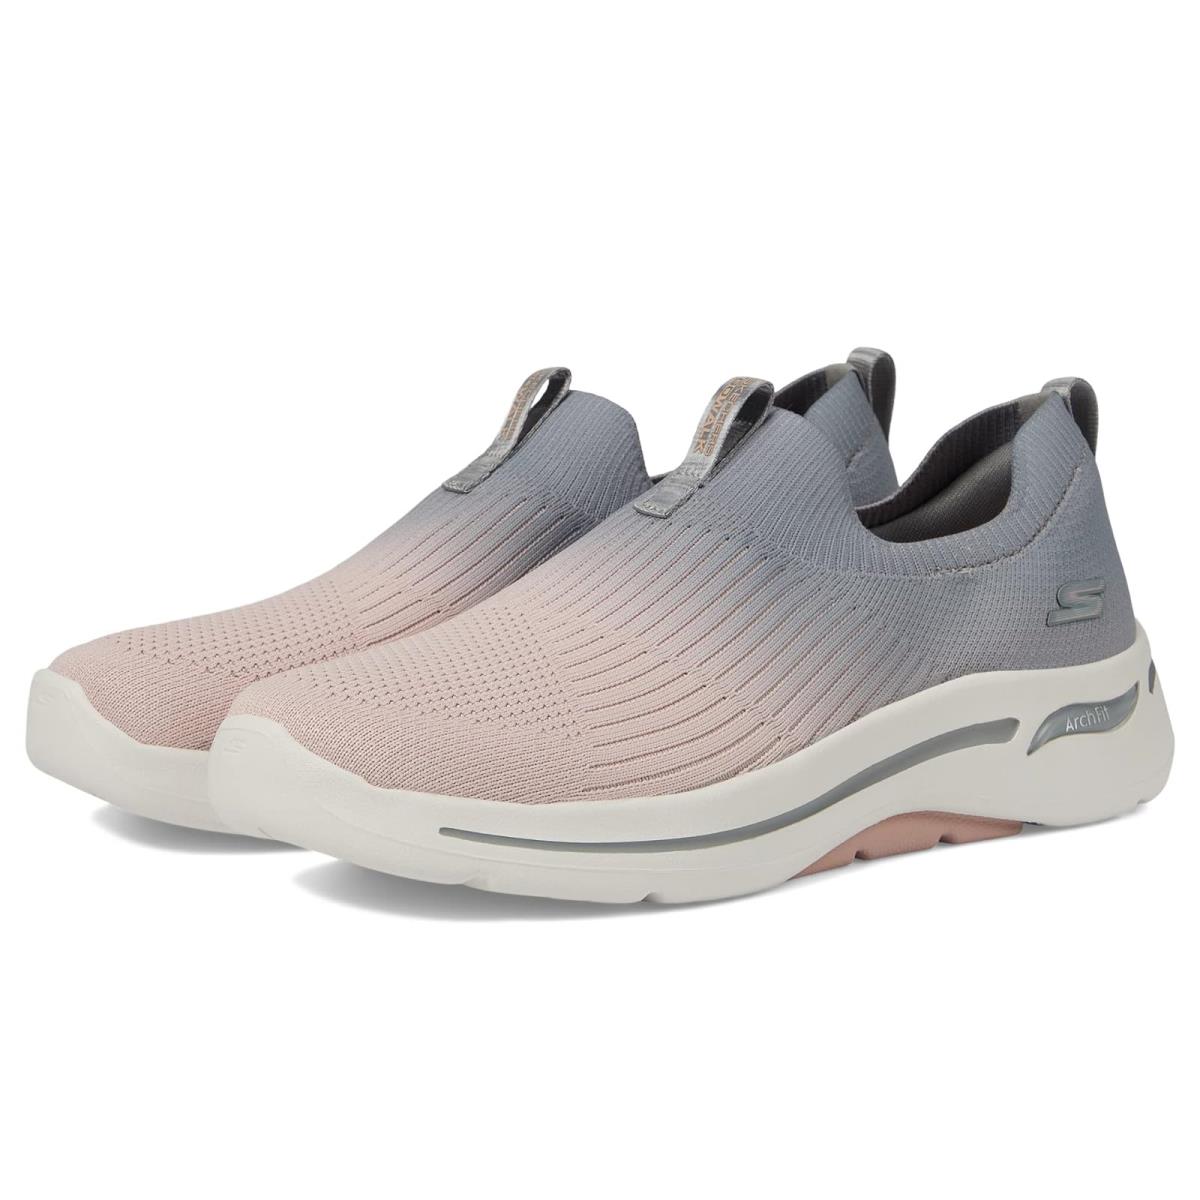 Woman`s Shoes Skechers Performance Go Walk Arch Fit - Ocean Vibes Gray/Pink